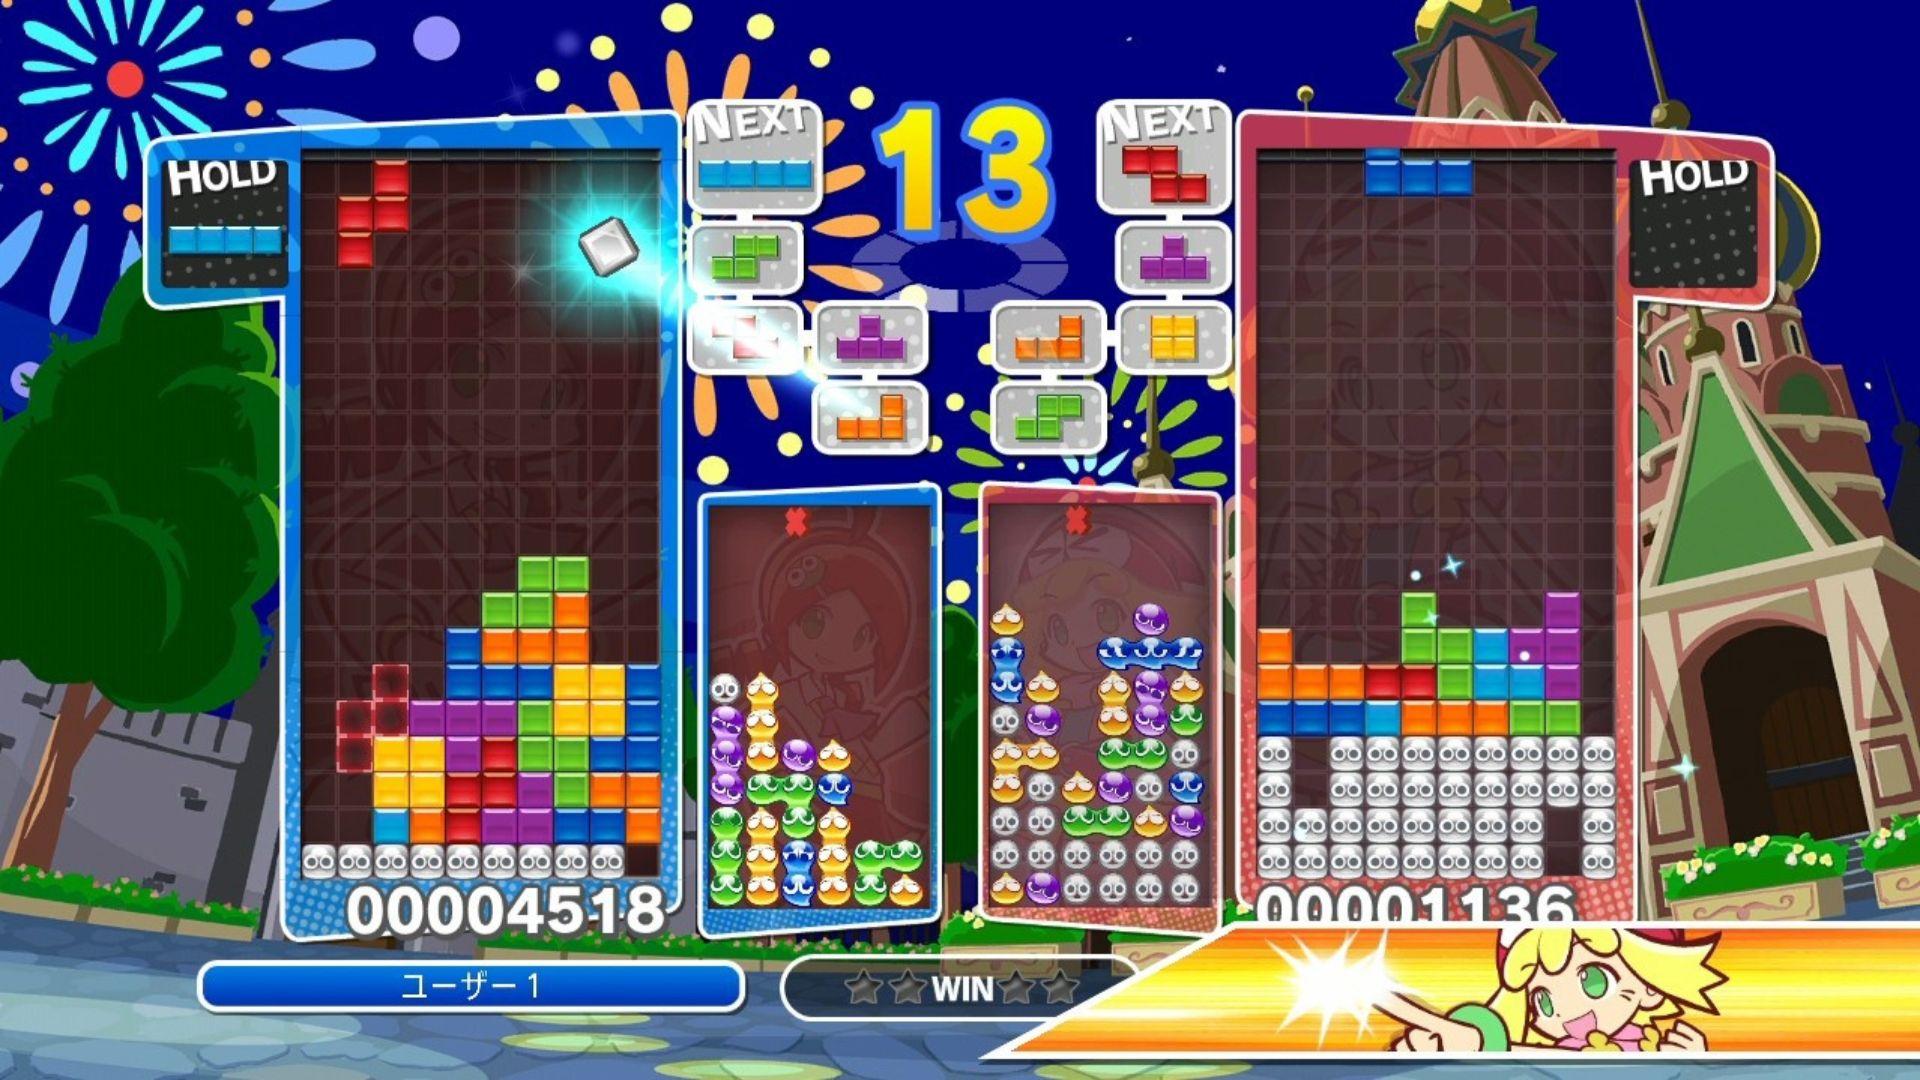 One of the many Tetris games, Puyo Puyo Tetris, showing two puzzle screens with Tetris blocks falling and smaller puzzle screens showing a game of Puyo Puyo. The screen is covered in colours and blocks falling, as well as numbers popping up.